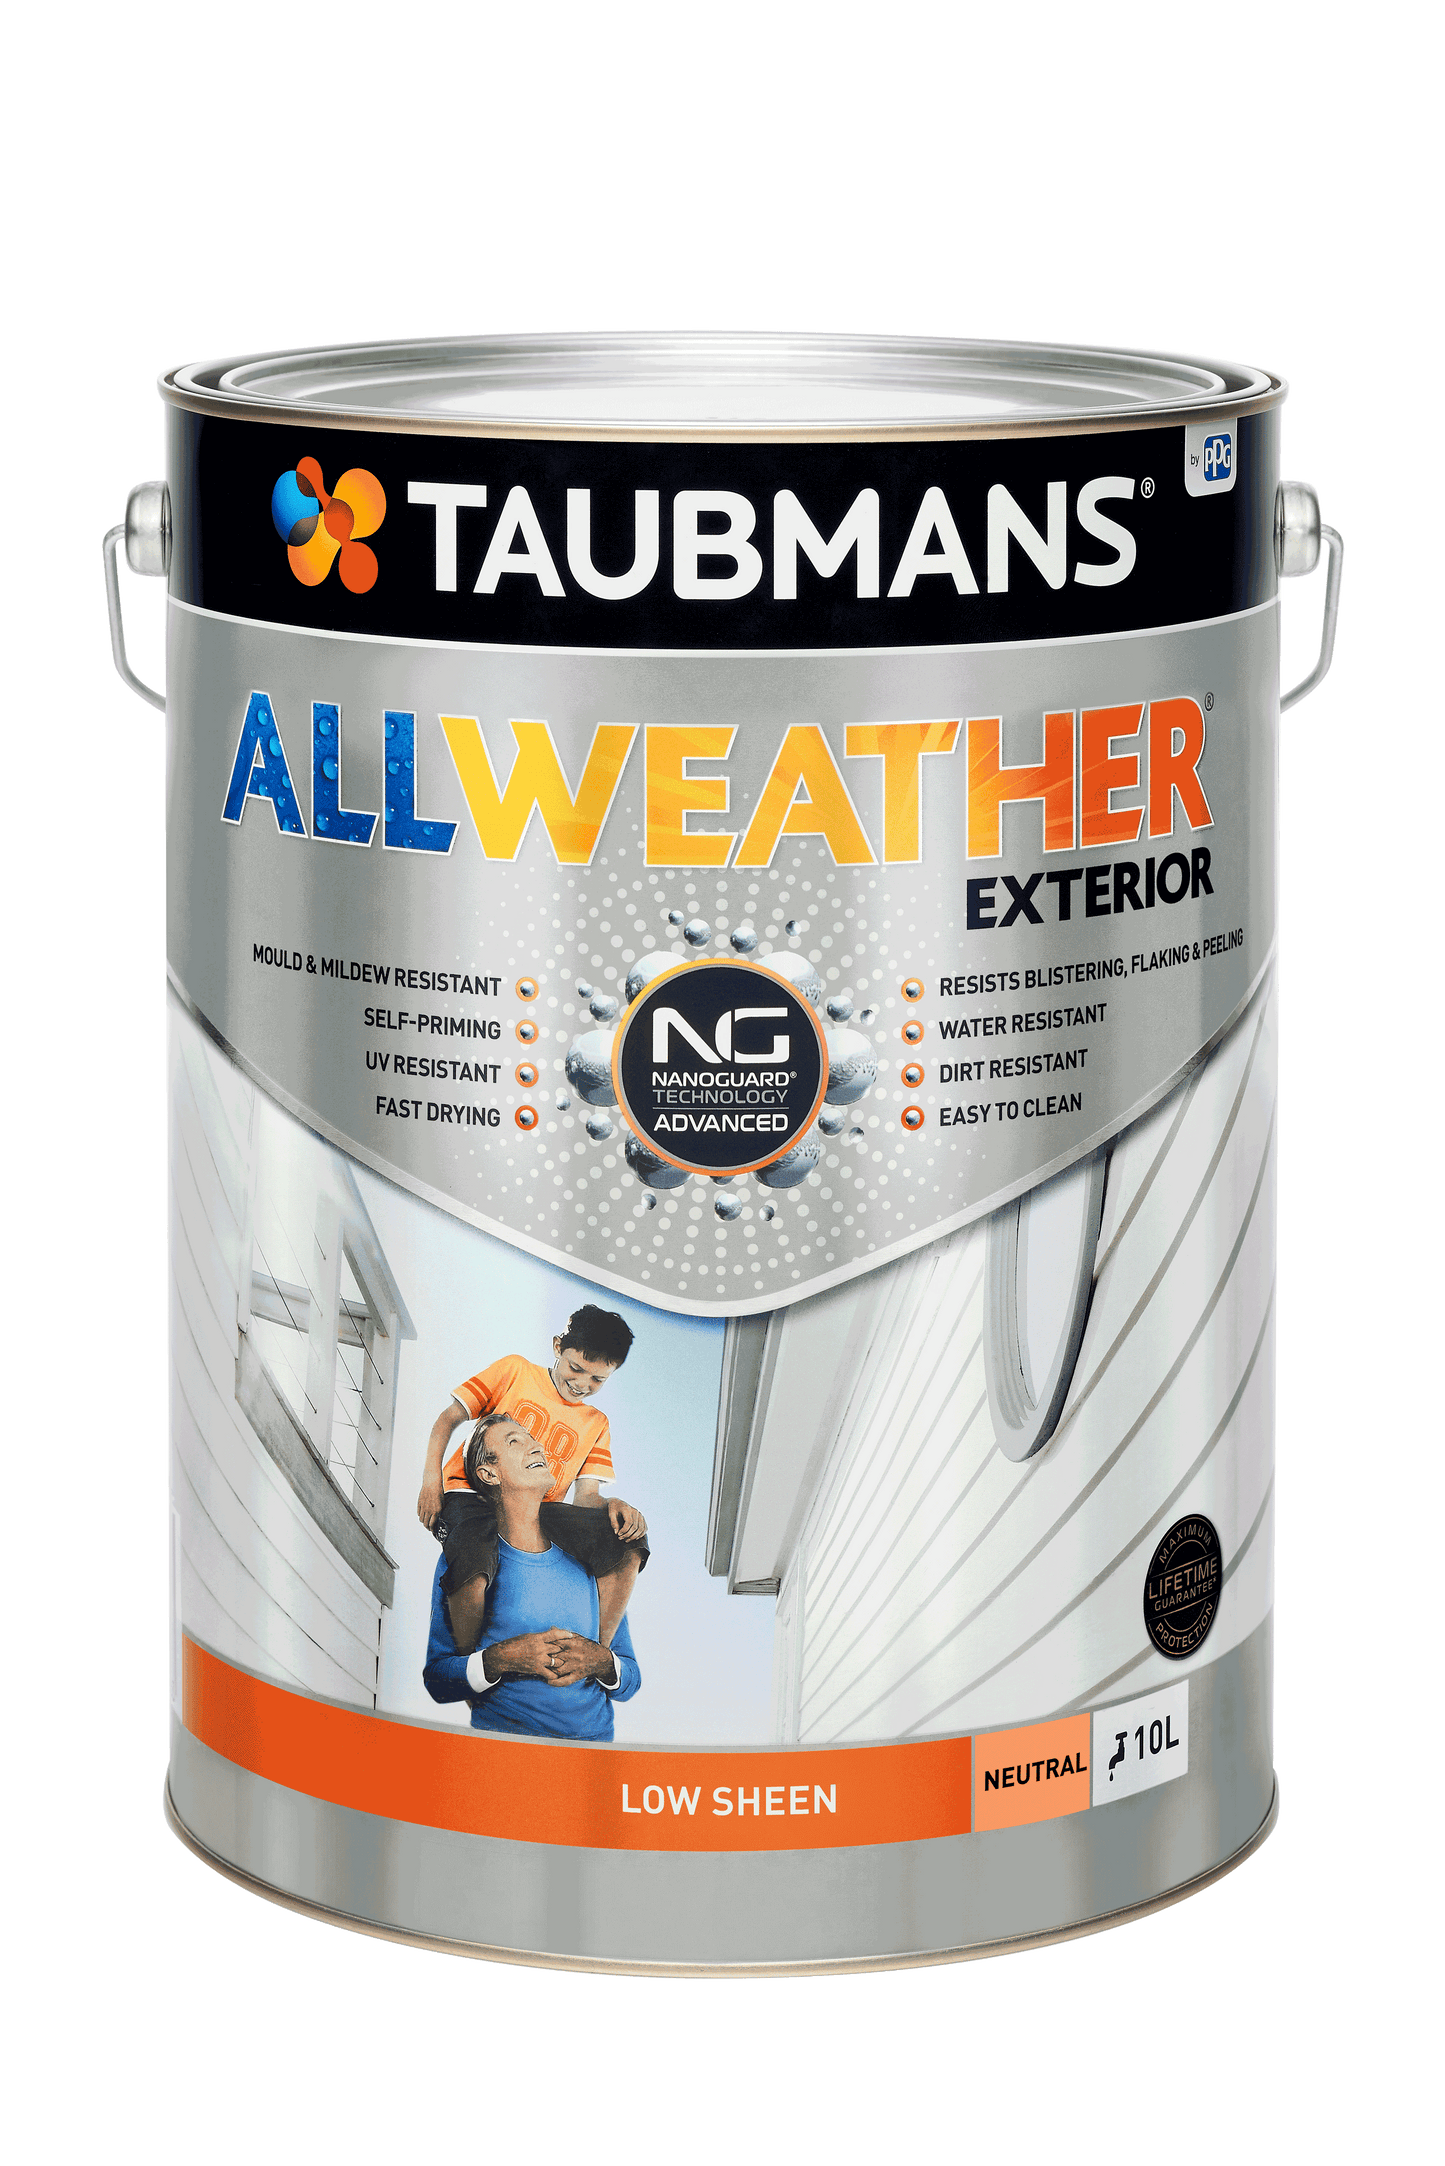 Taubmans All Weather Exterior Paint 10L- Neutral Low Sheen